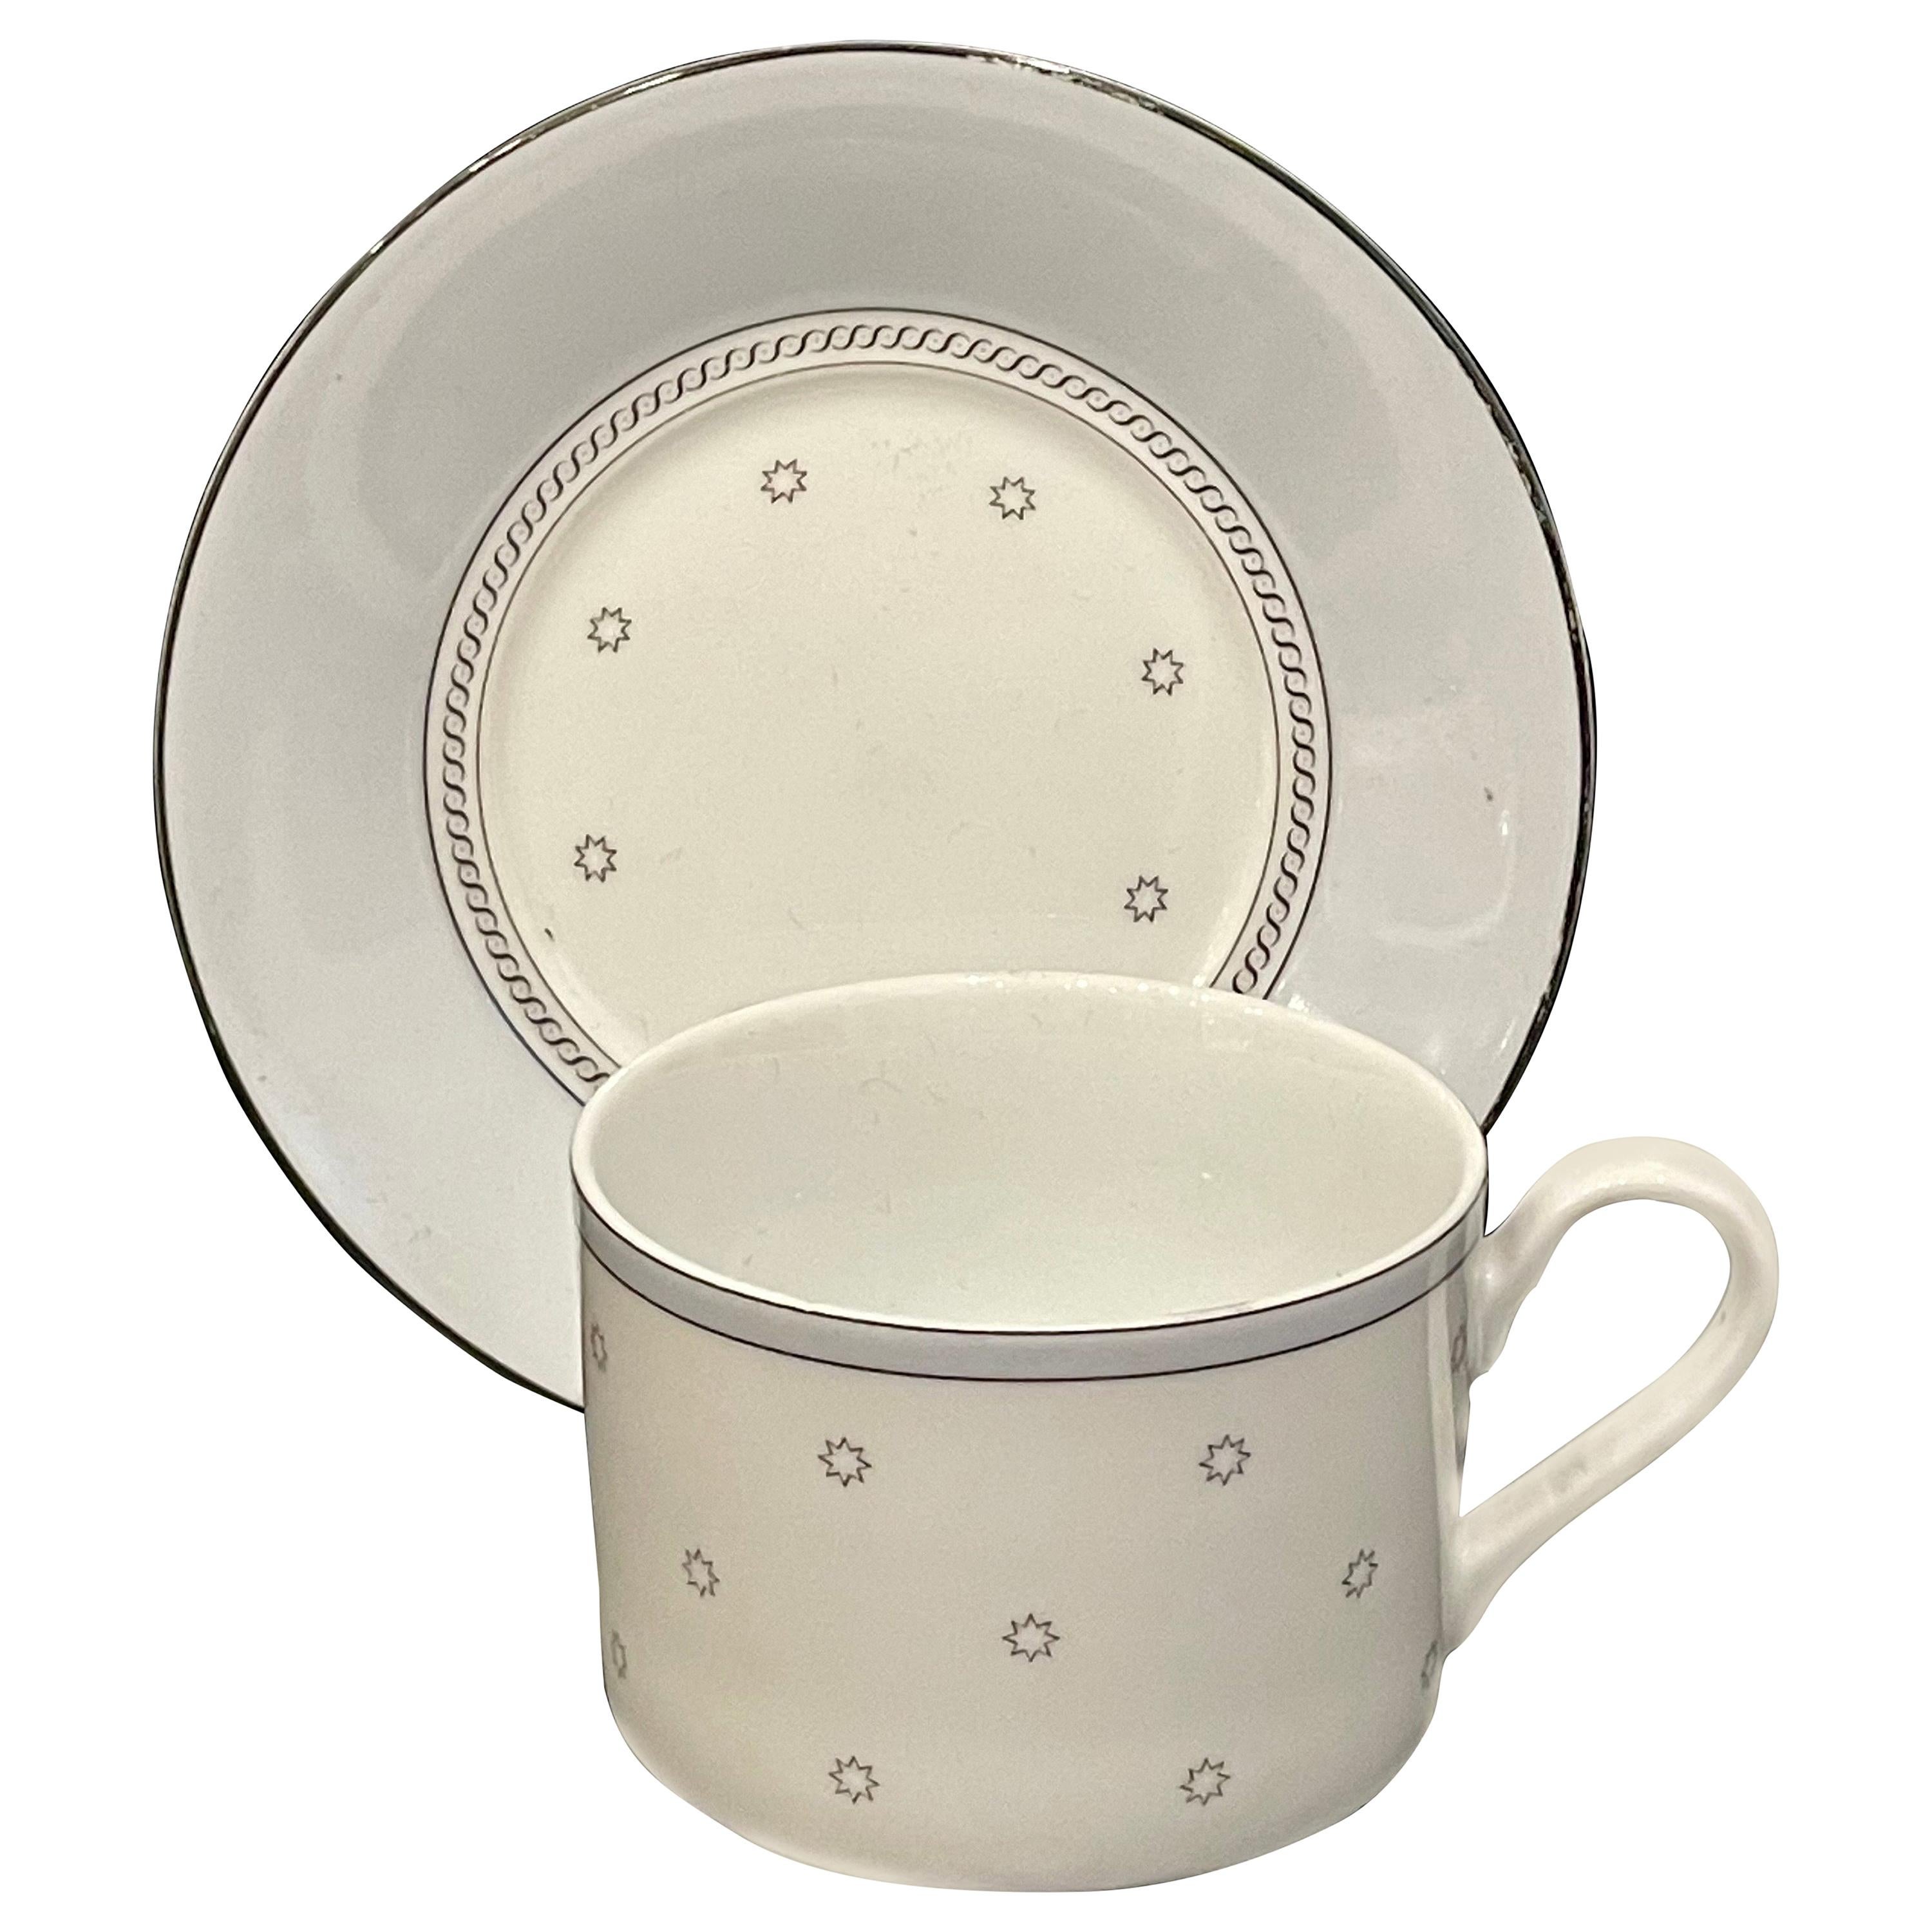 Cup & Saucer Designed by Michael Graves for Swid Powell Cityline Corinth For Sale